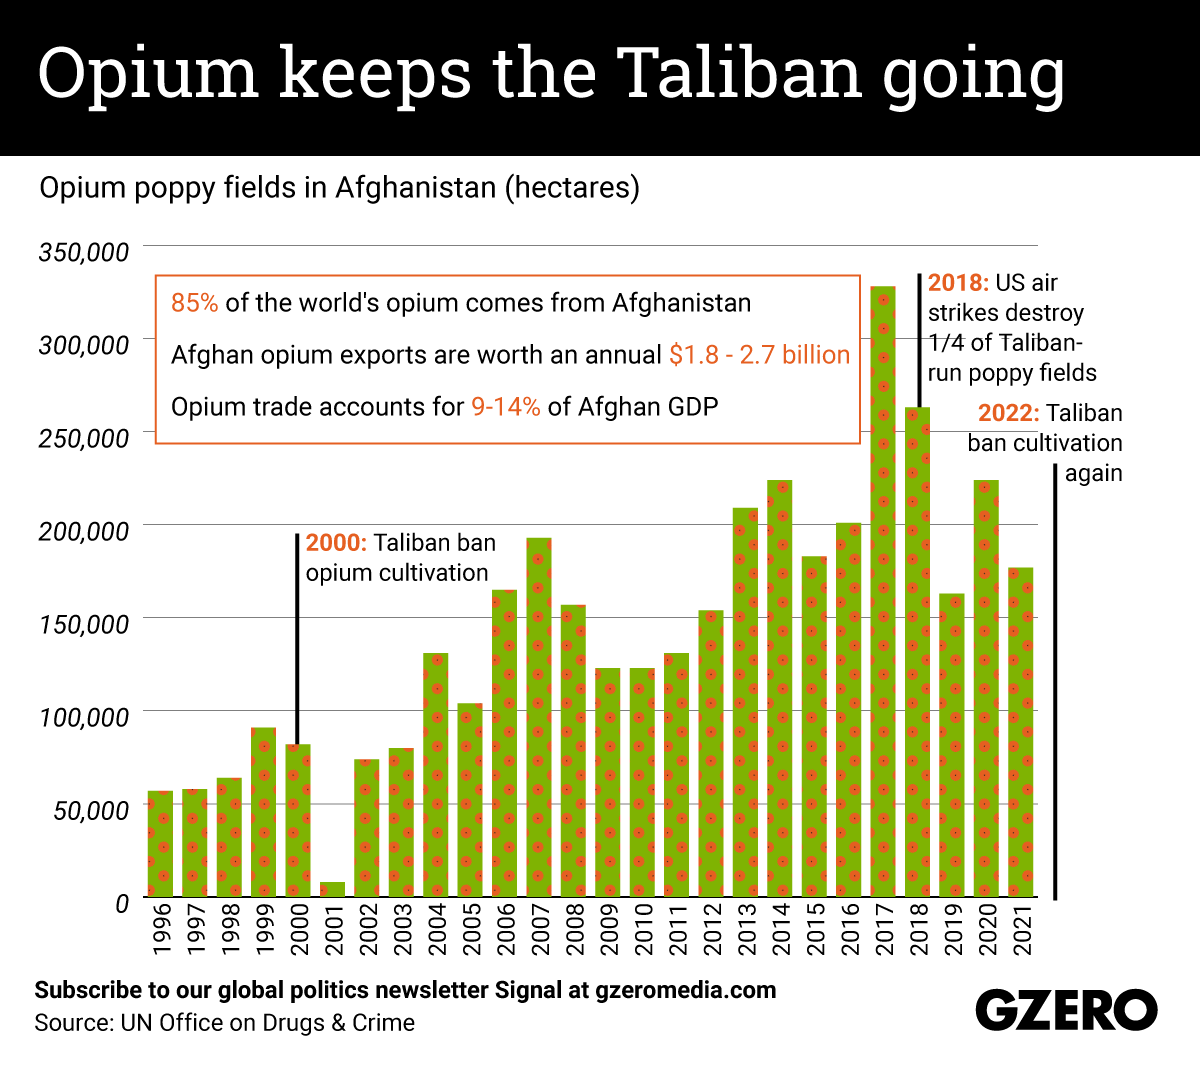 The Graphic Truth: Opium keeps the Taliban going